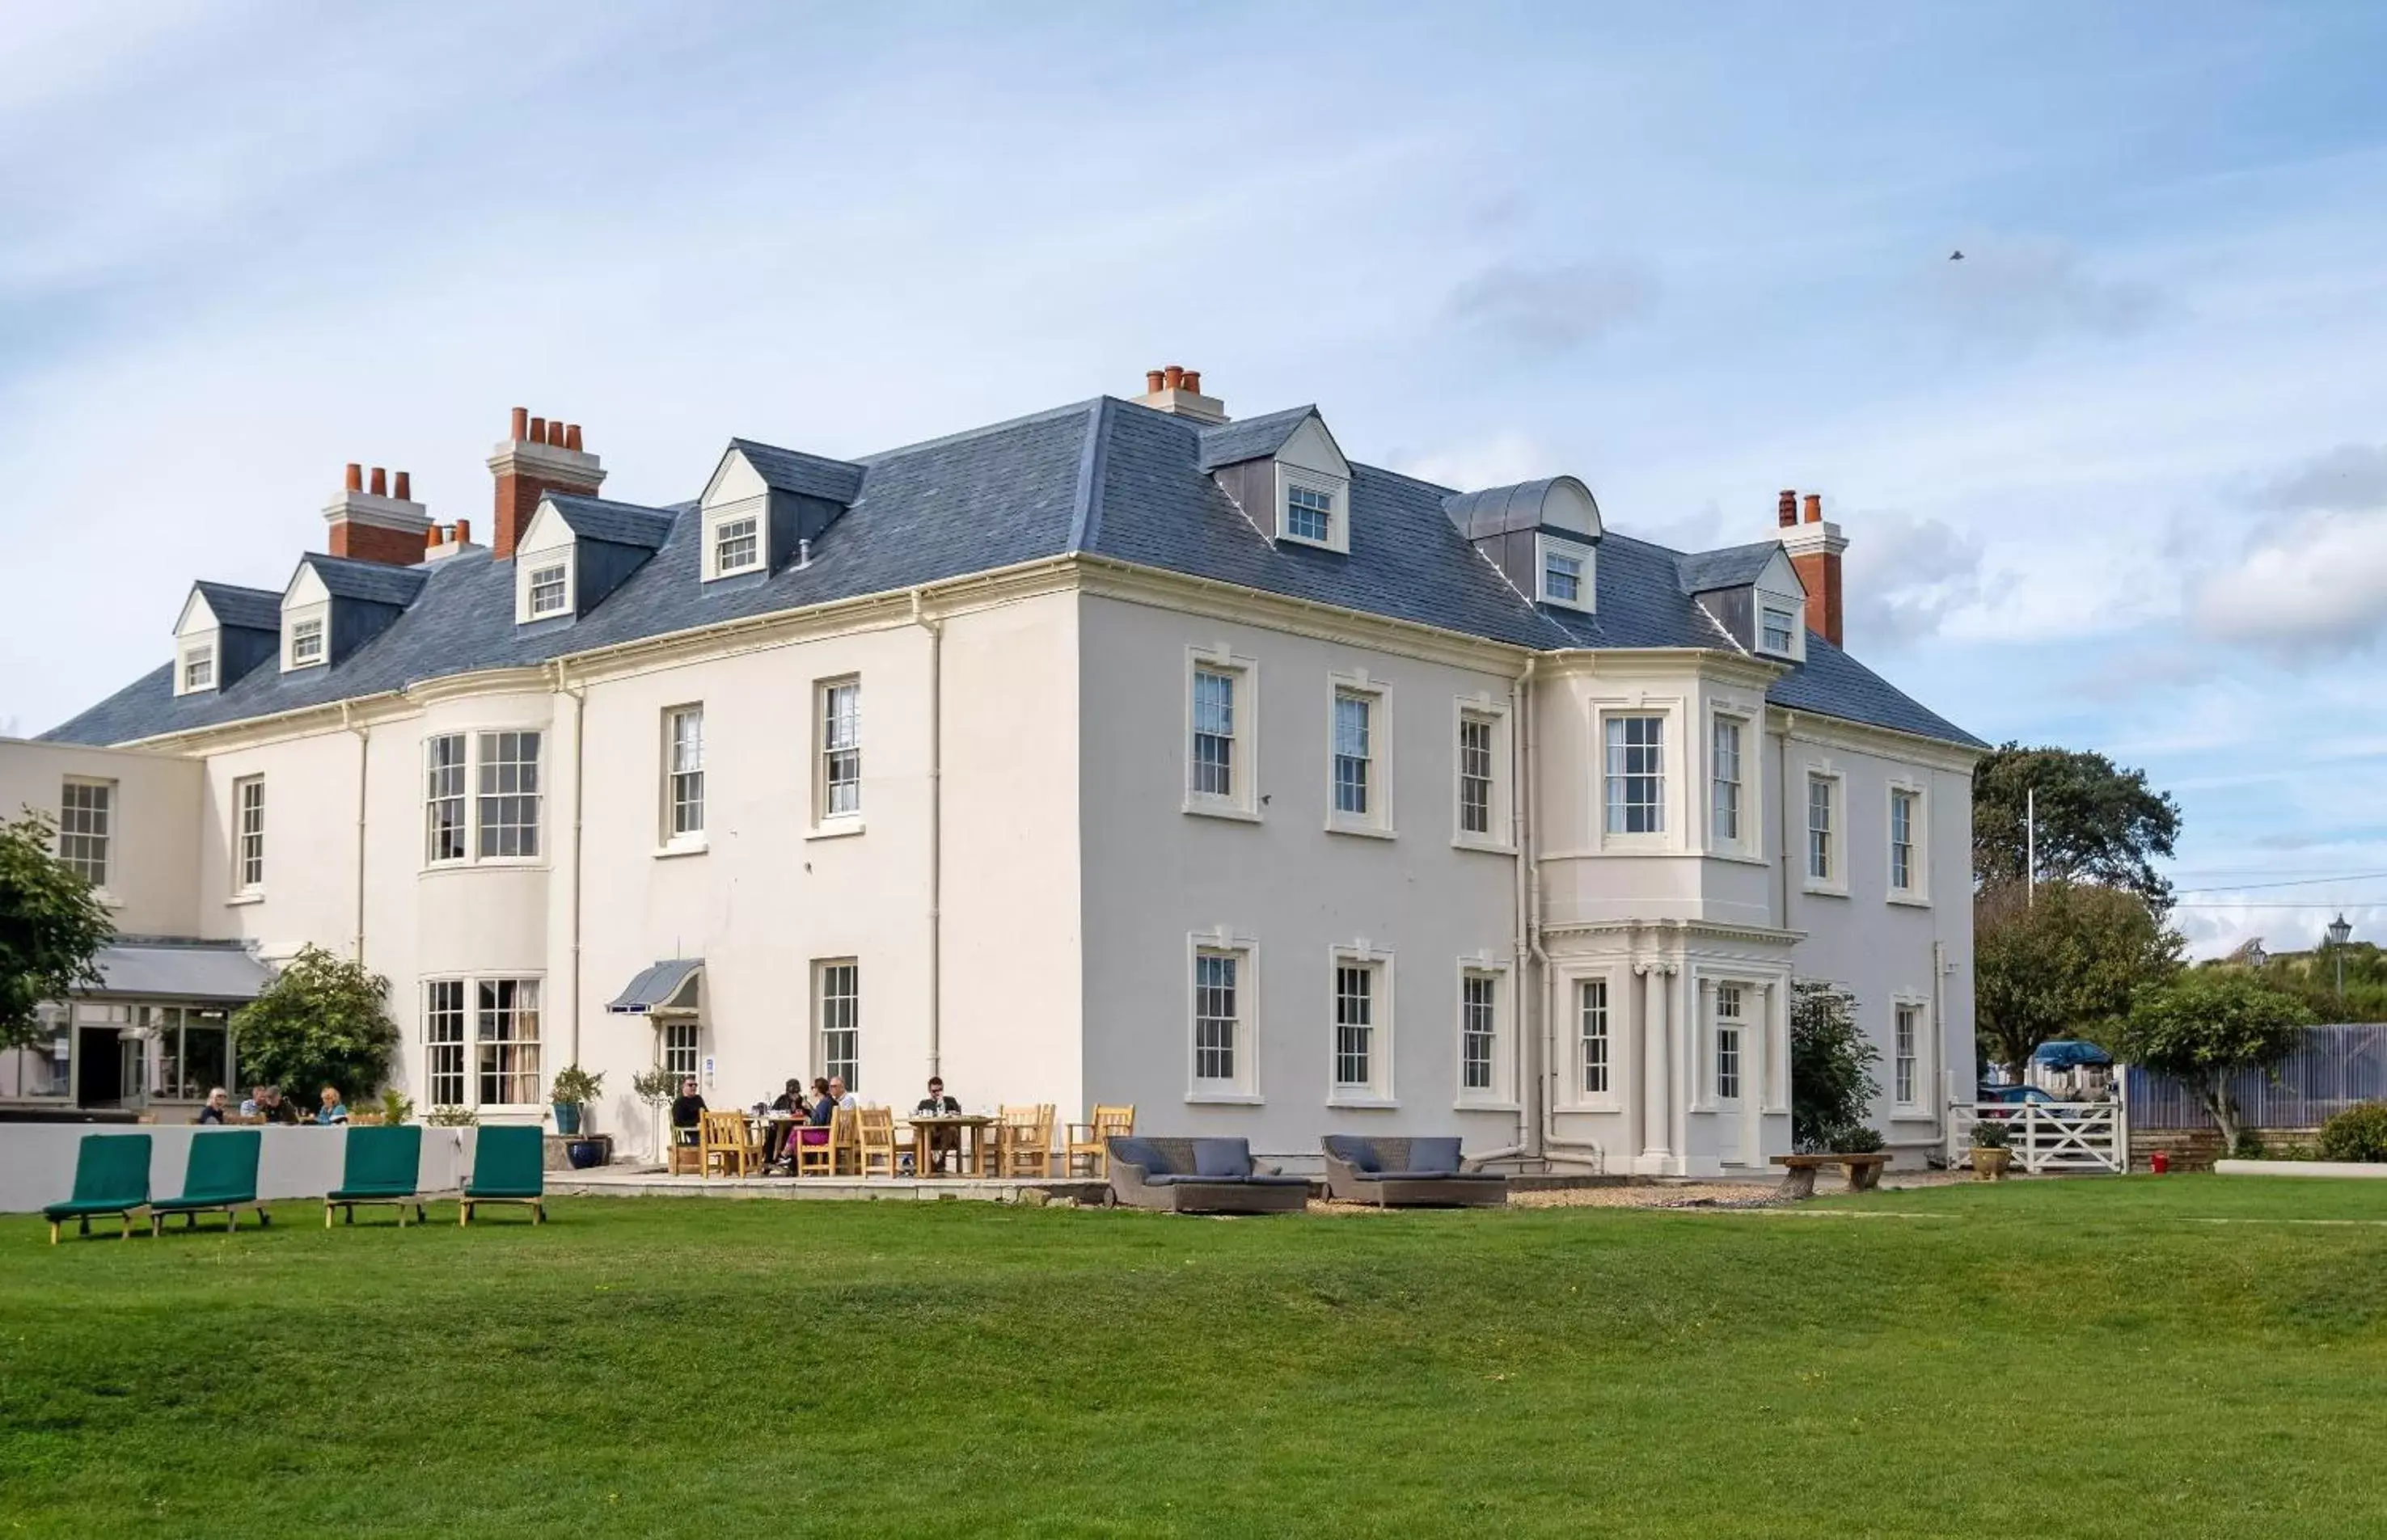 Property Building in Moonfleet Manor - A Luxury Family Hotel